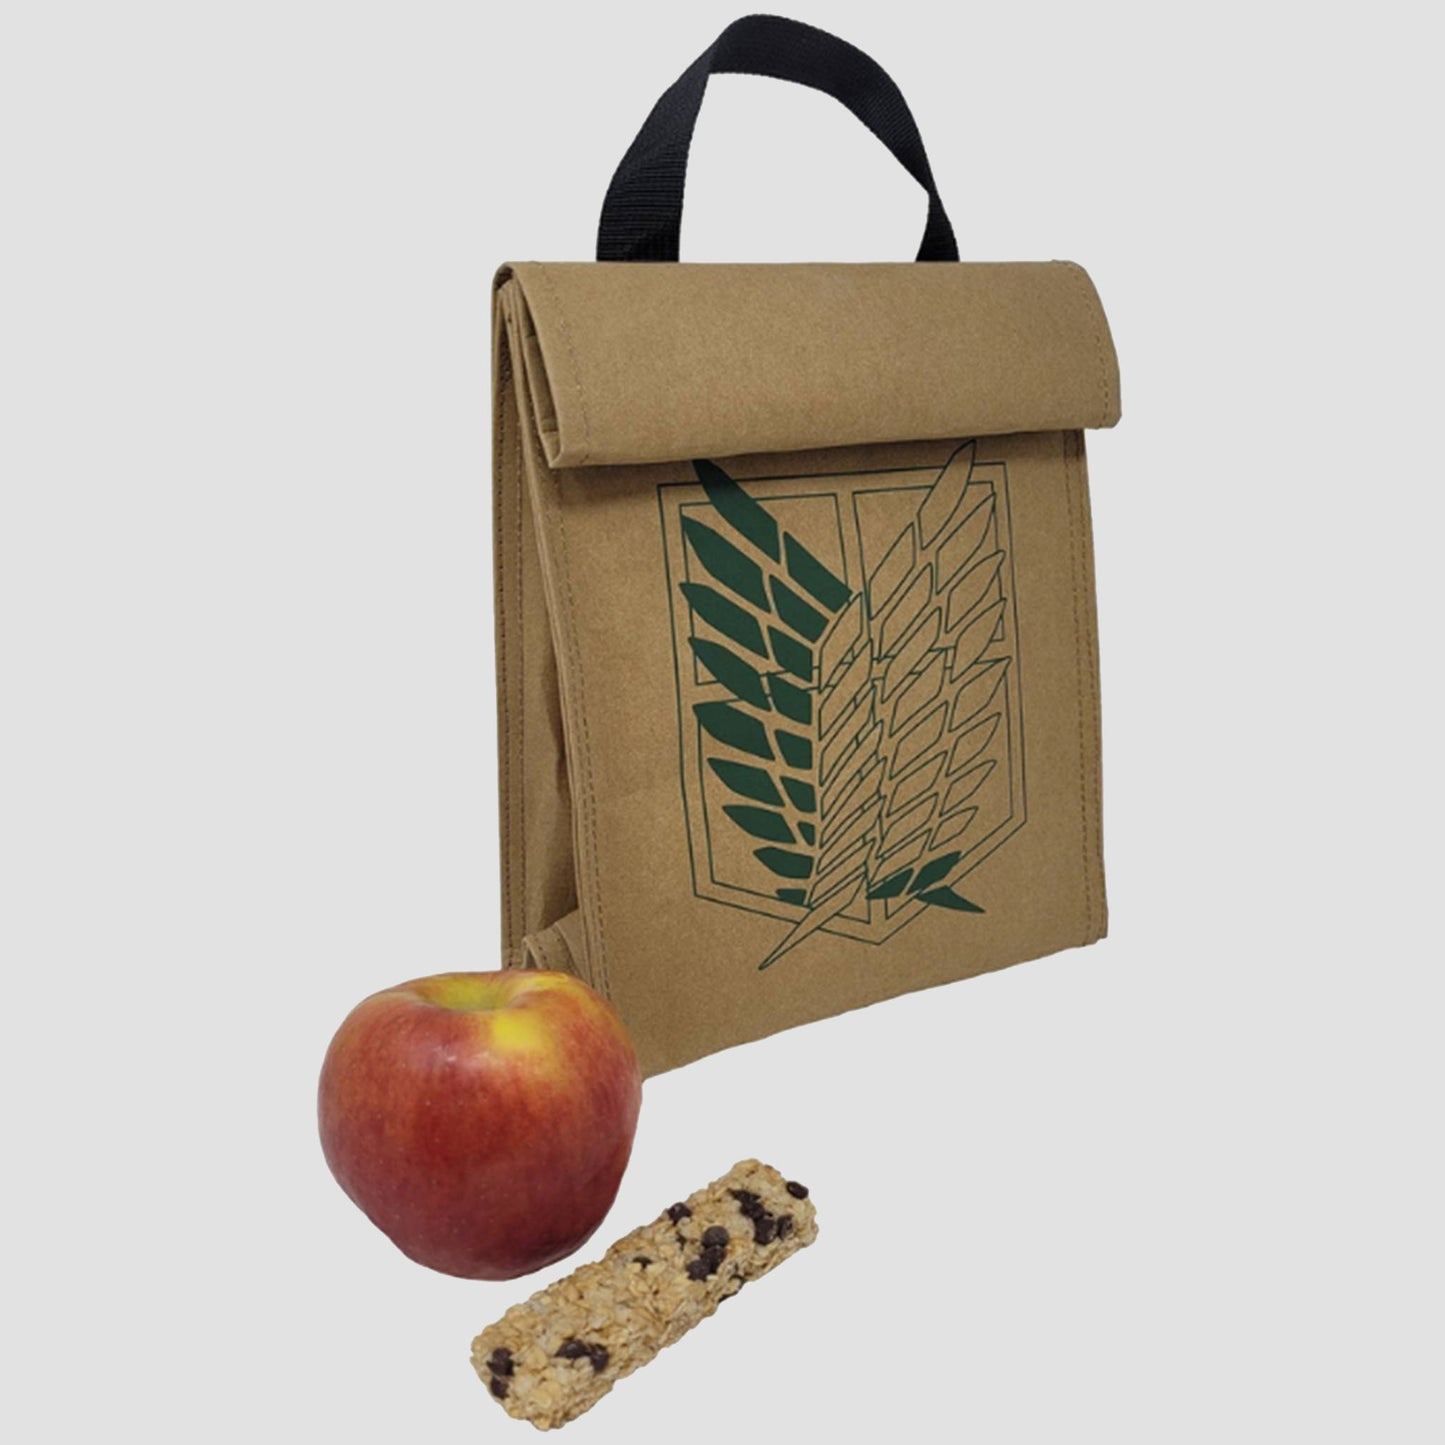 Scout Regiment (Attack on Titan) Insulated Lunch Tote Bag